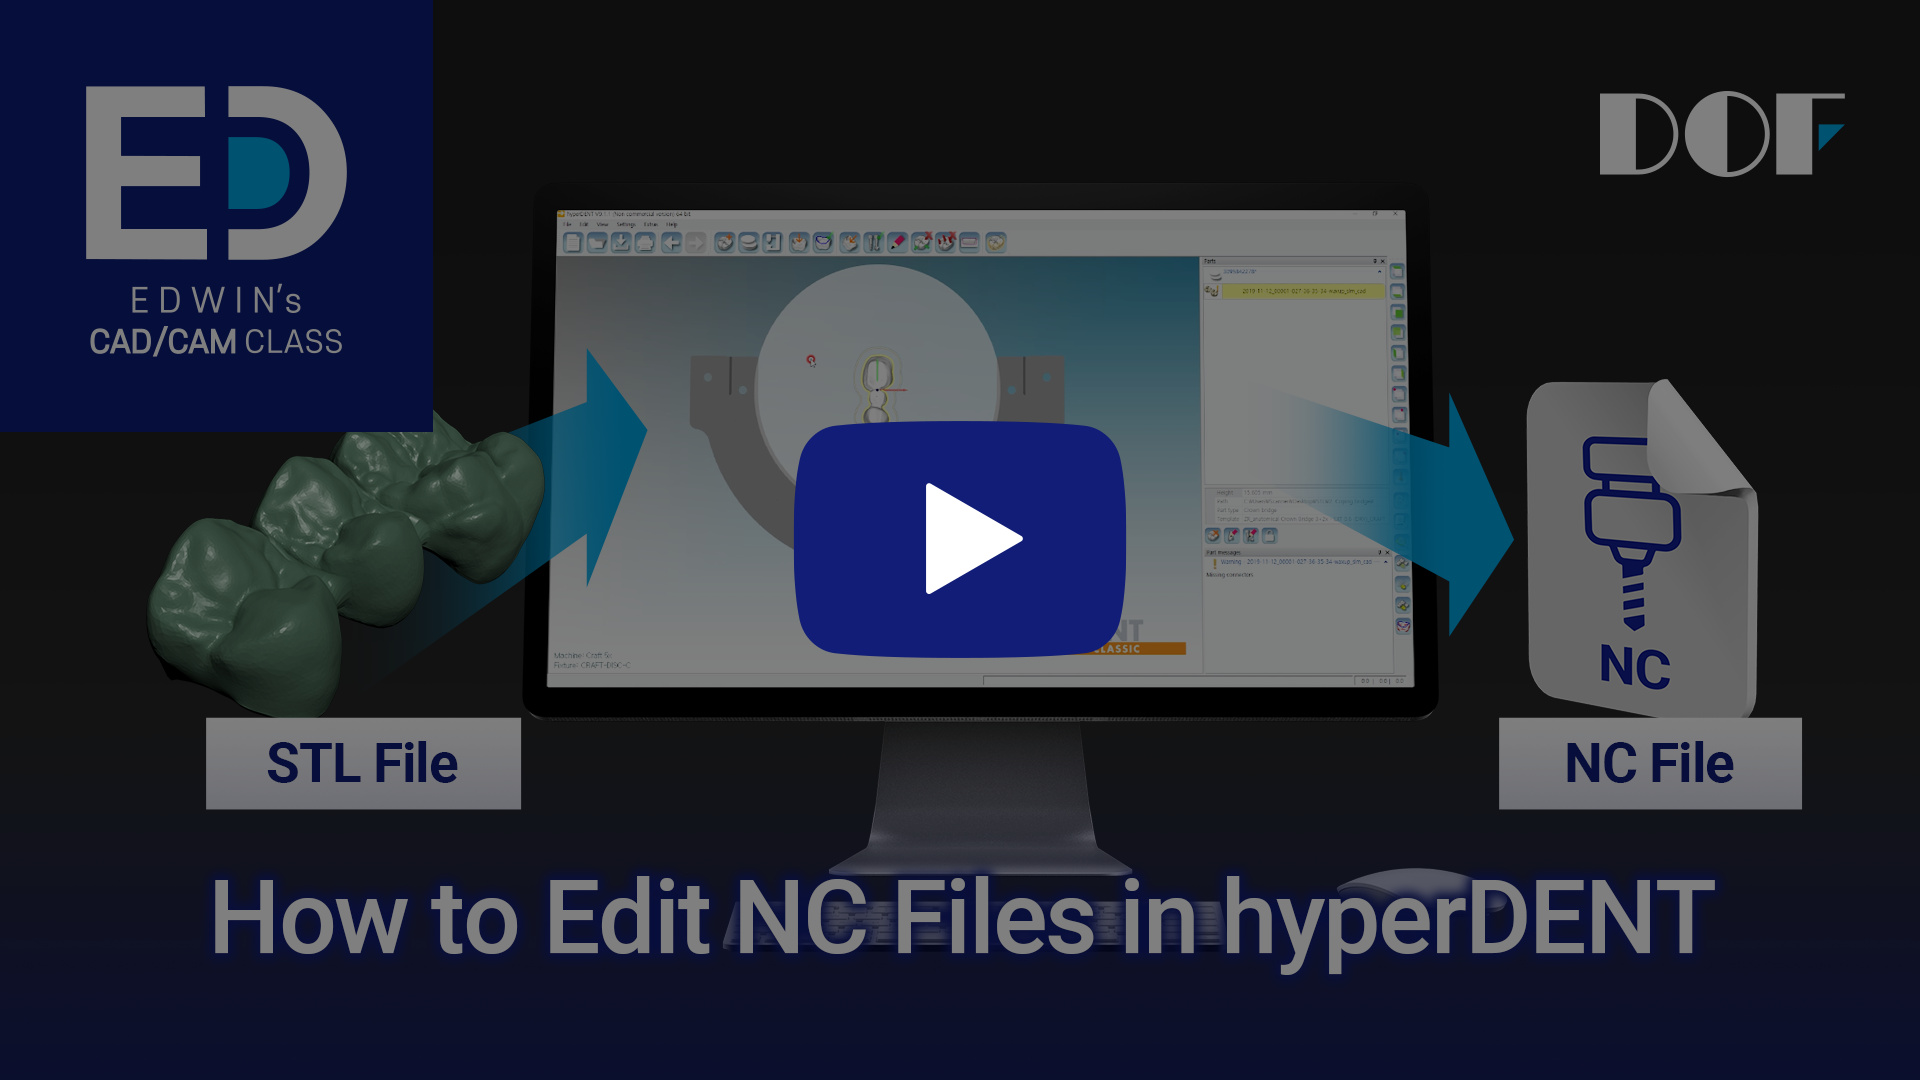 #17 How to edit NC files in hyperDENT_4.jpg